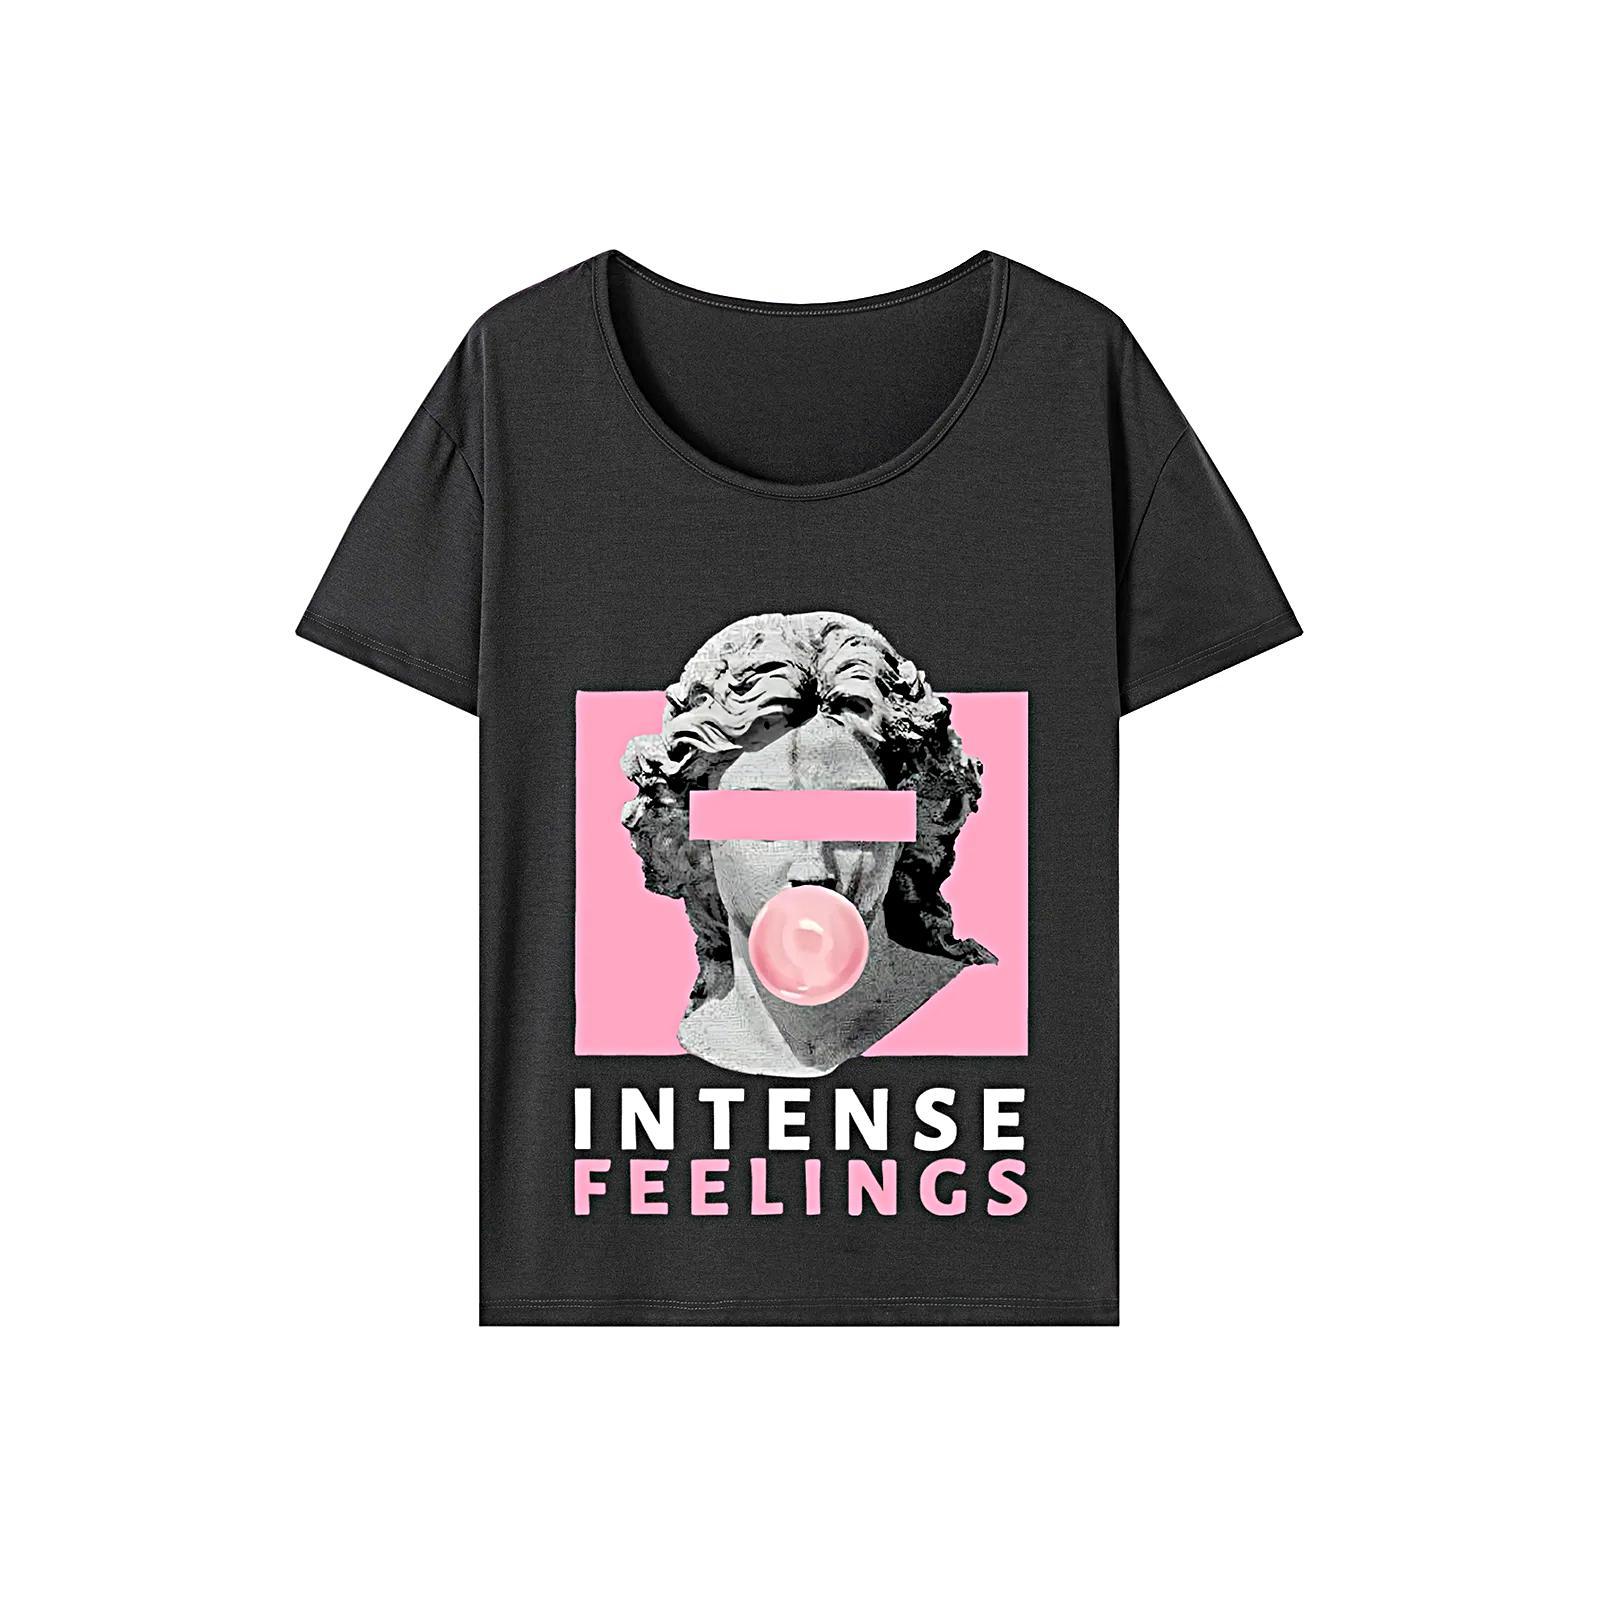 Womens T Shirt Summer Fashion Soft Crew Neck Tee for Vacation Commuting Work S